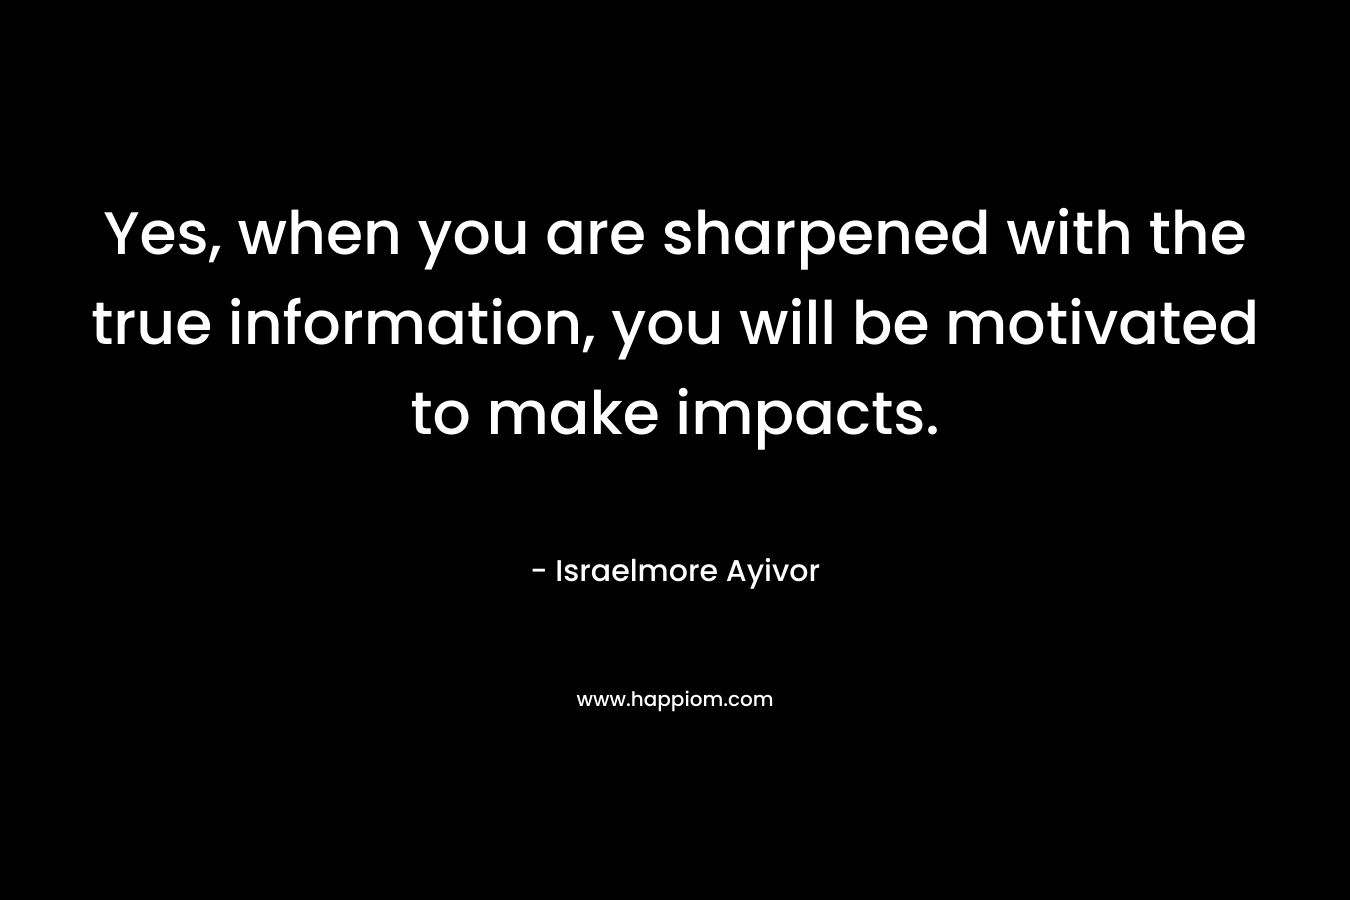 Yes, when you are sharpened with the true information, you will be motivated to make impacts. – Israelmore Ayivor